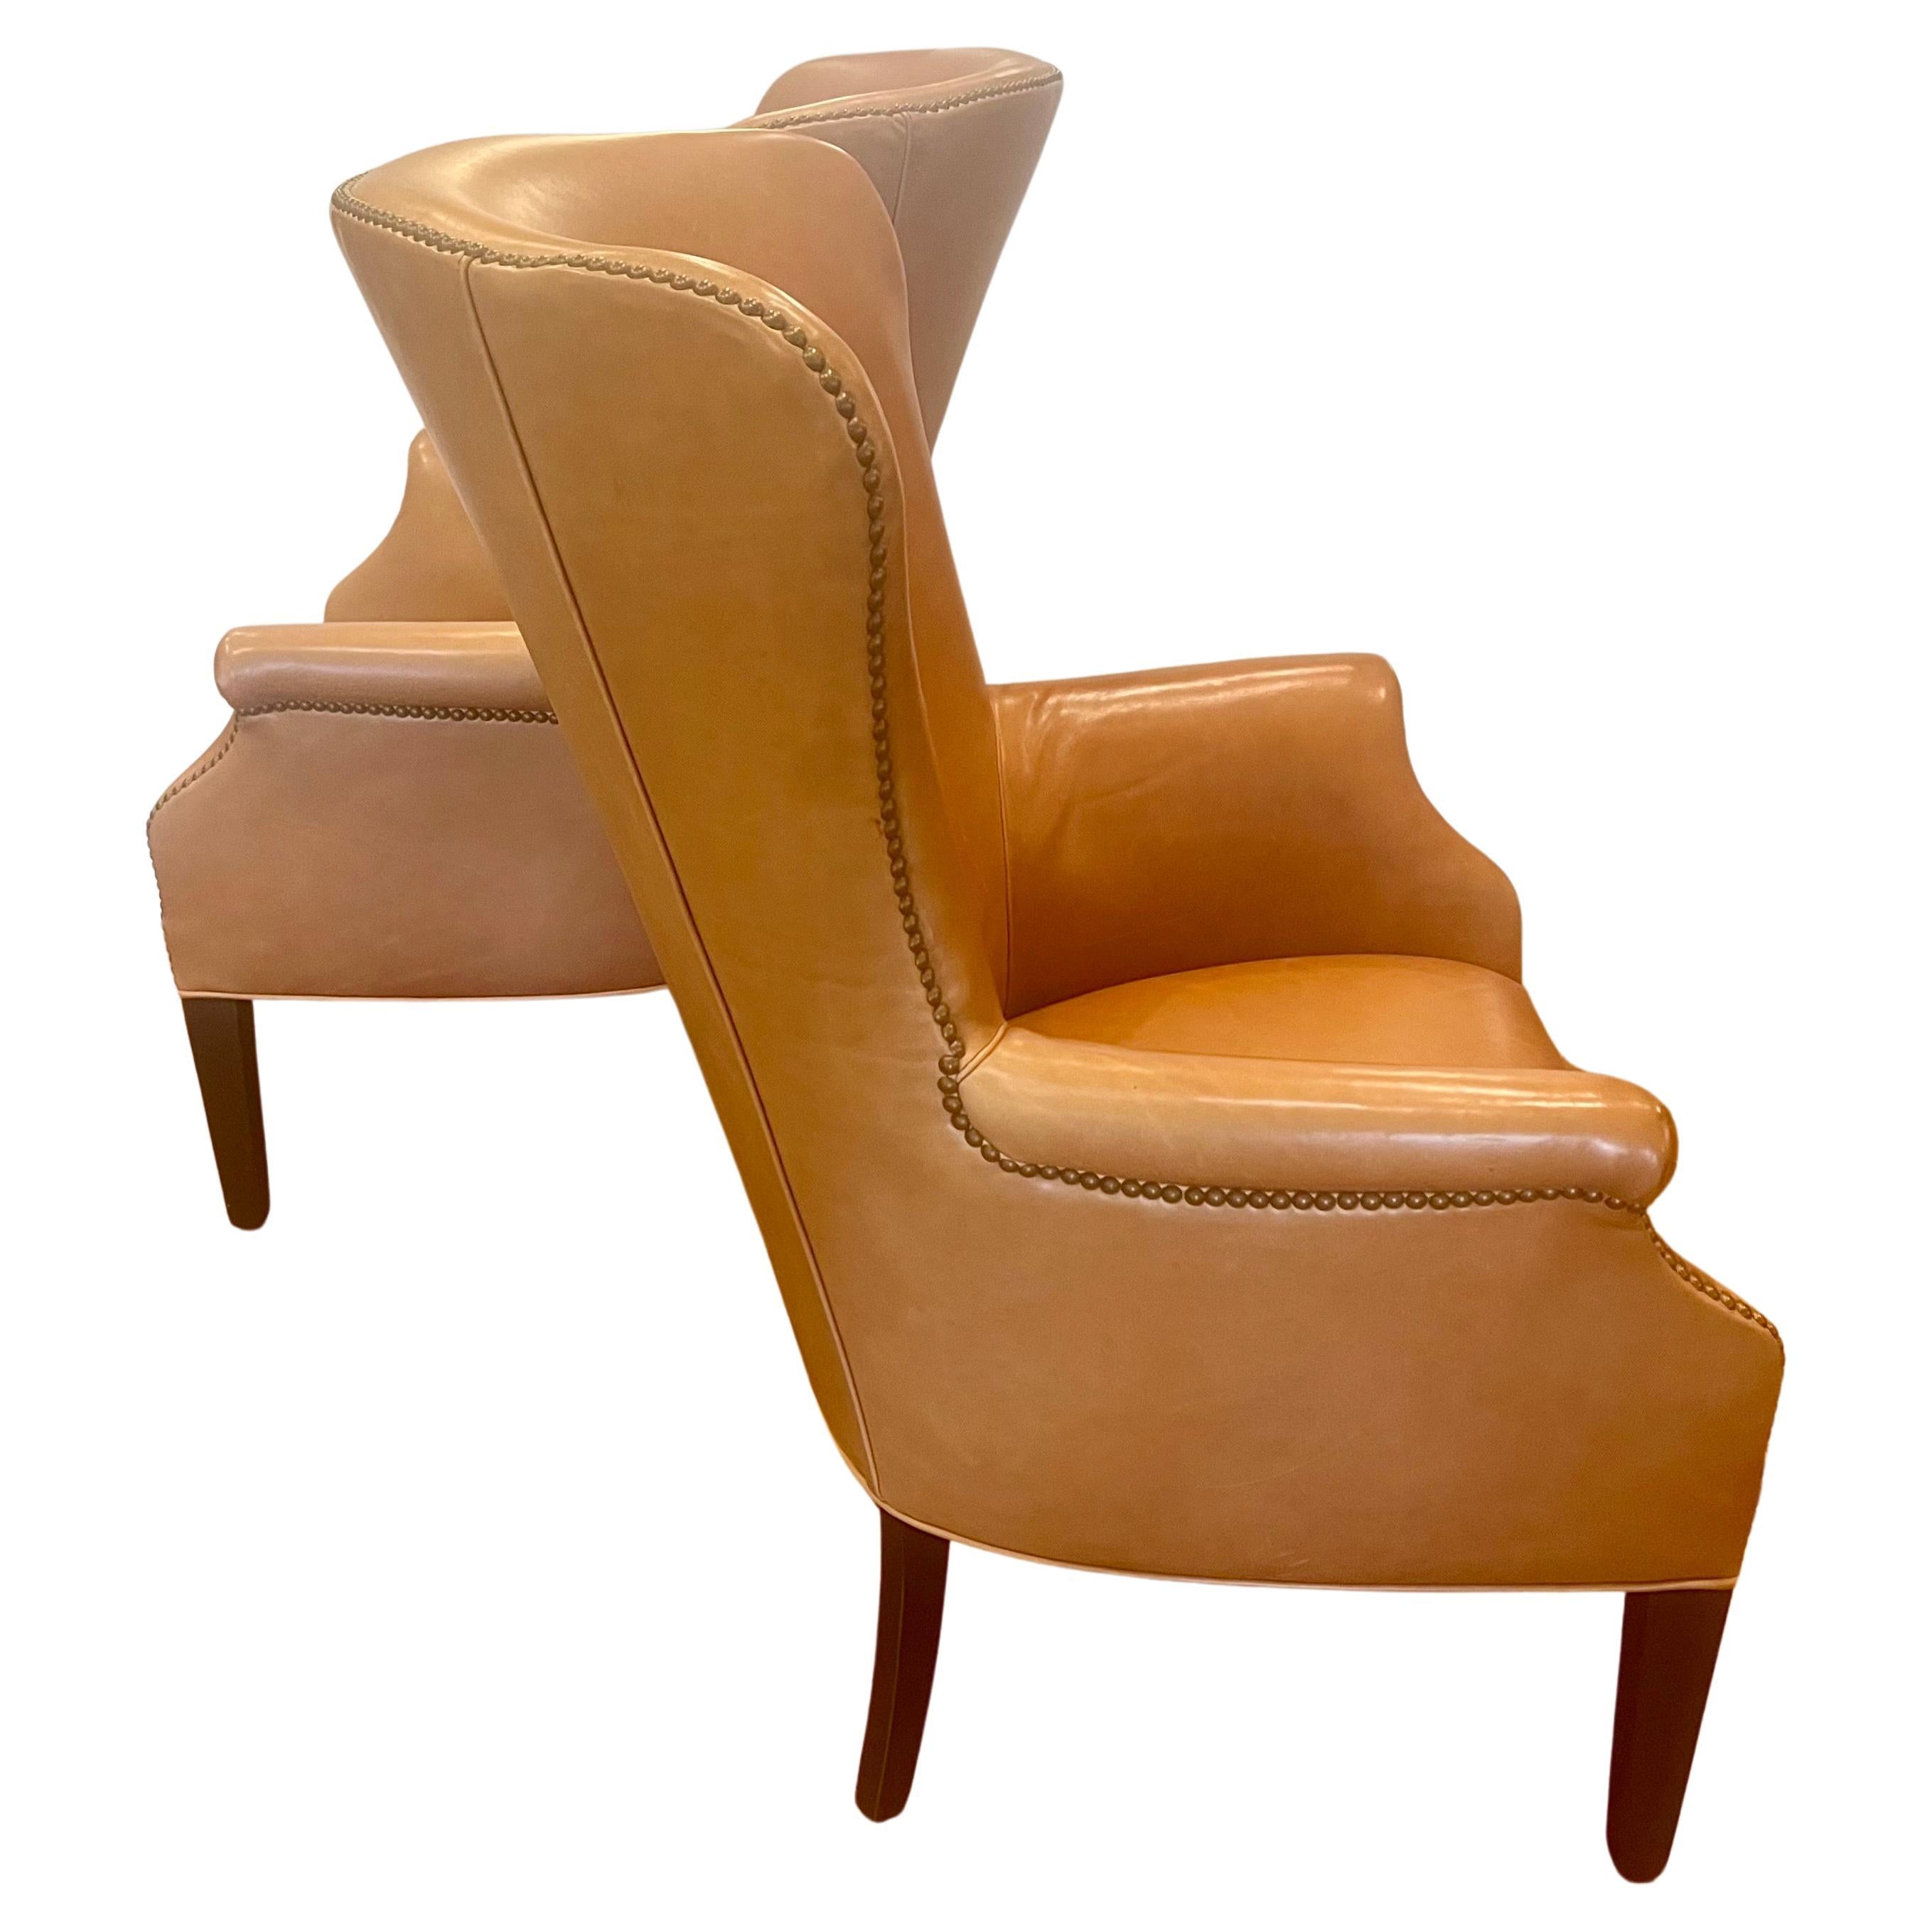 Pair of Contemporary Caramel Leather Wingback Armchairs by Williams Sonoma